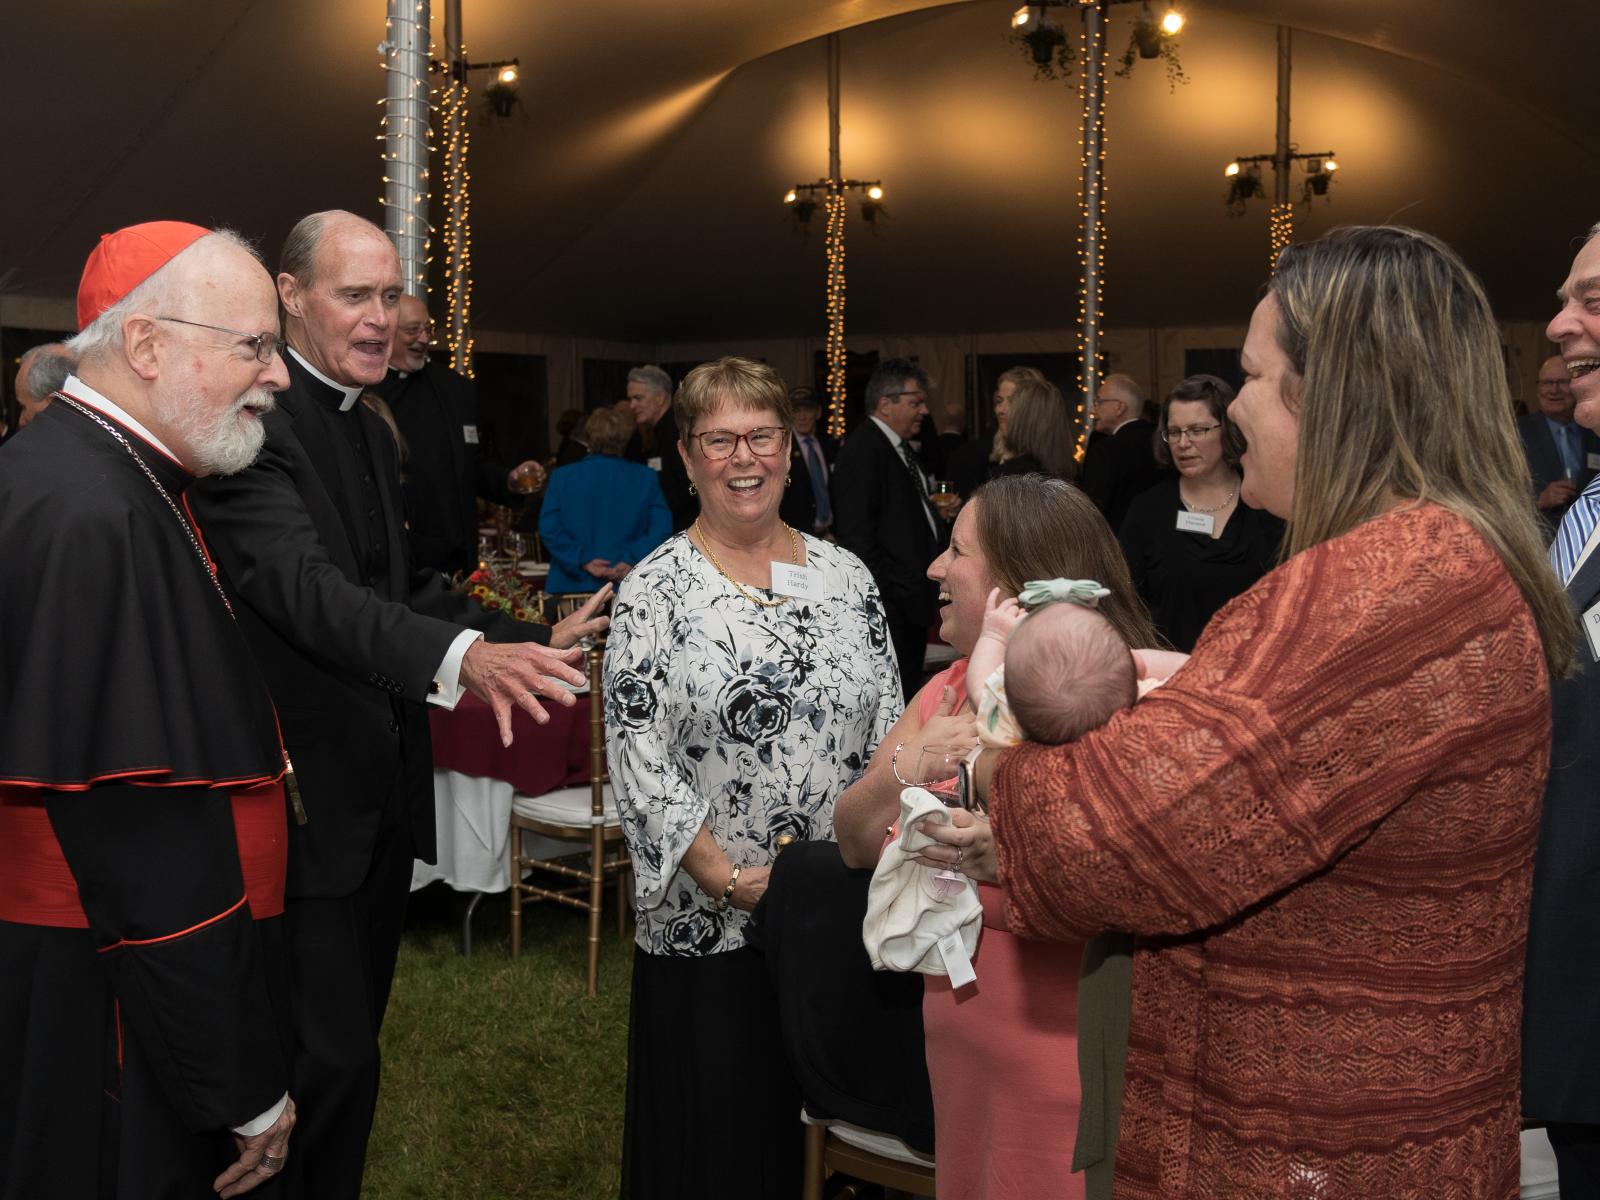 41st Annual Lawn Party Raises $350,000 for Priestly Formation 33